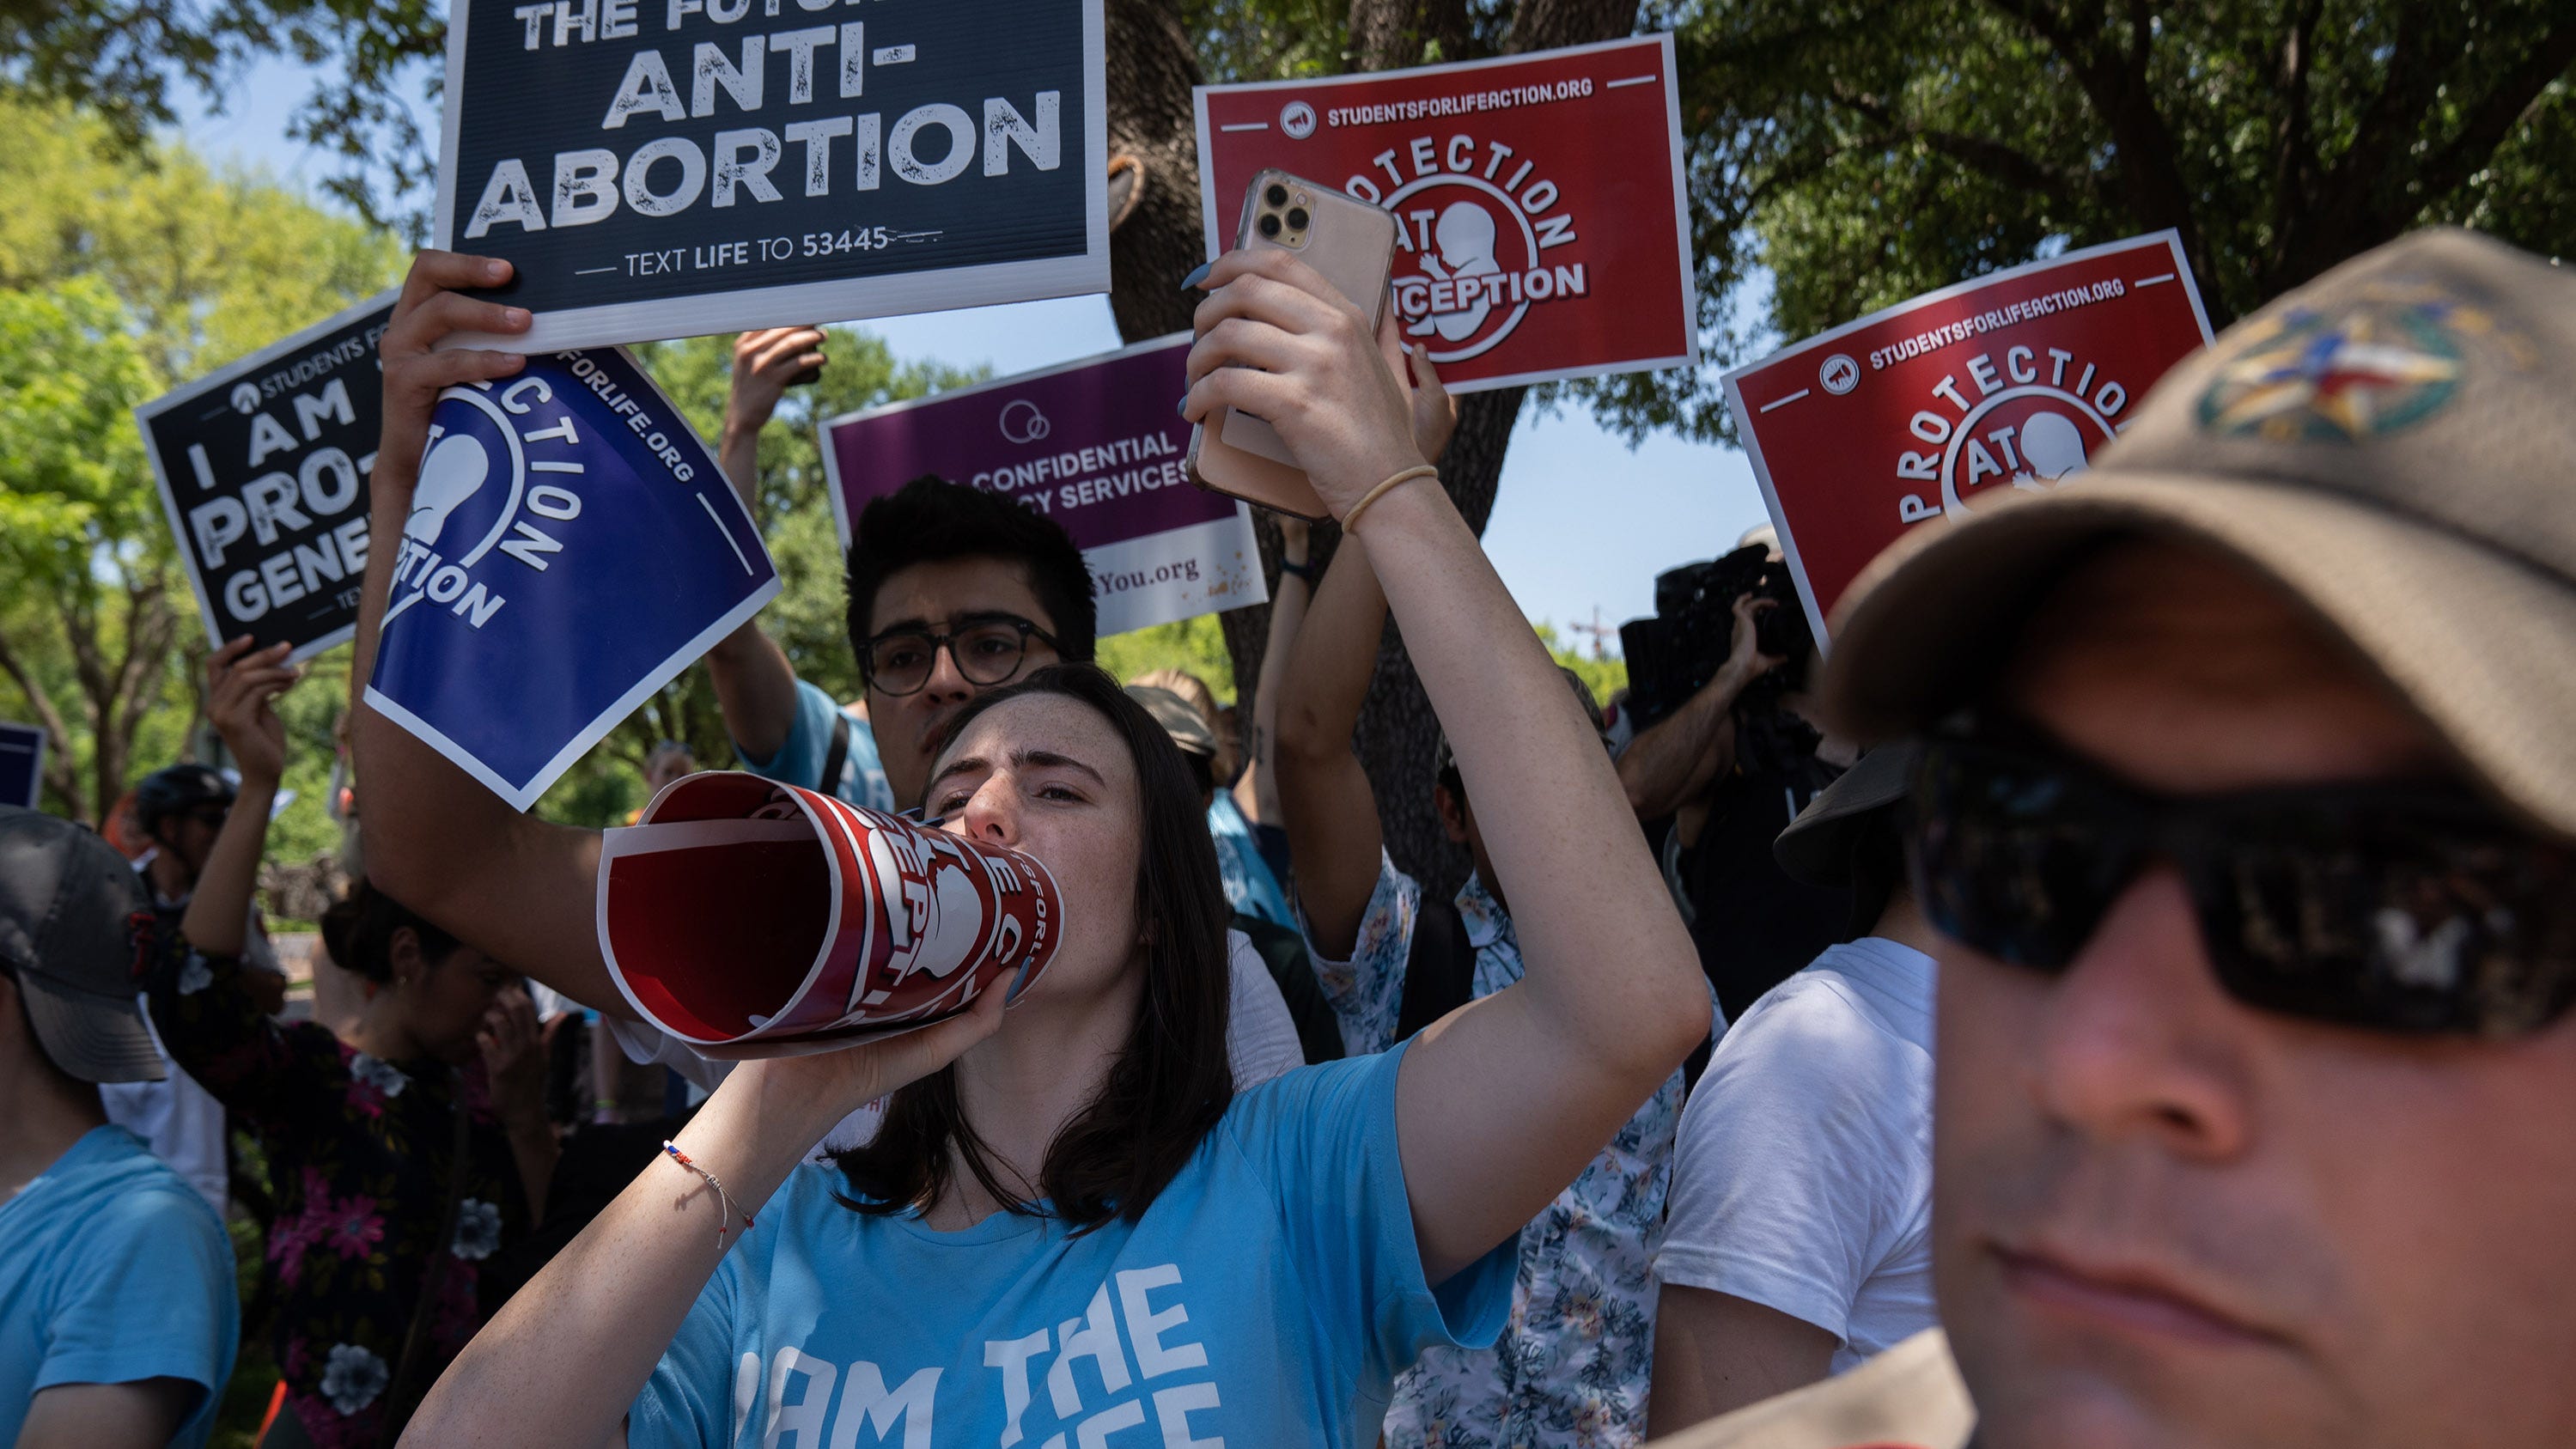 Abortion laws from 1800s became legal issue after Supreme Court ruling